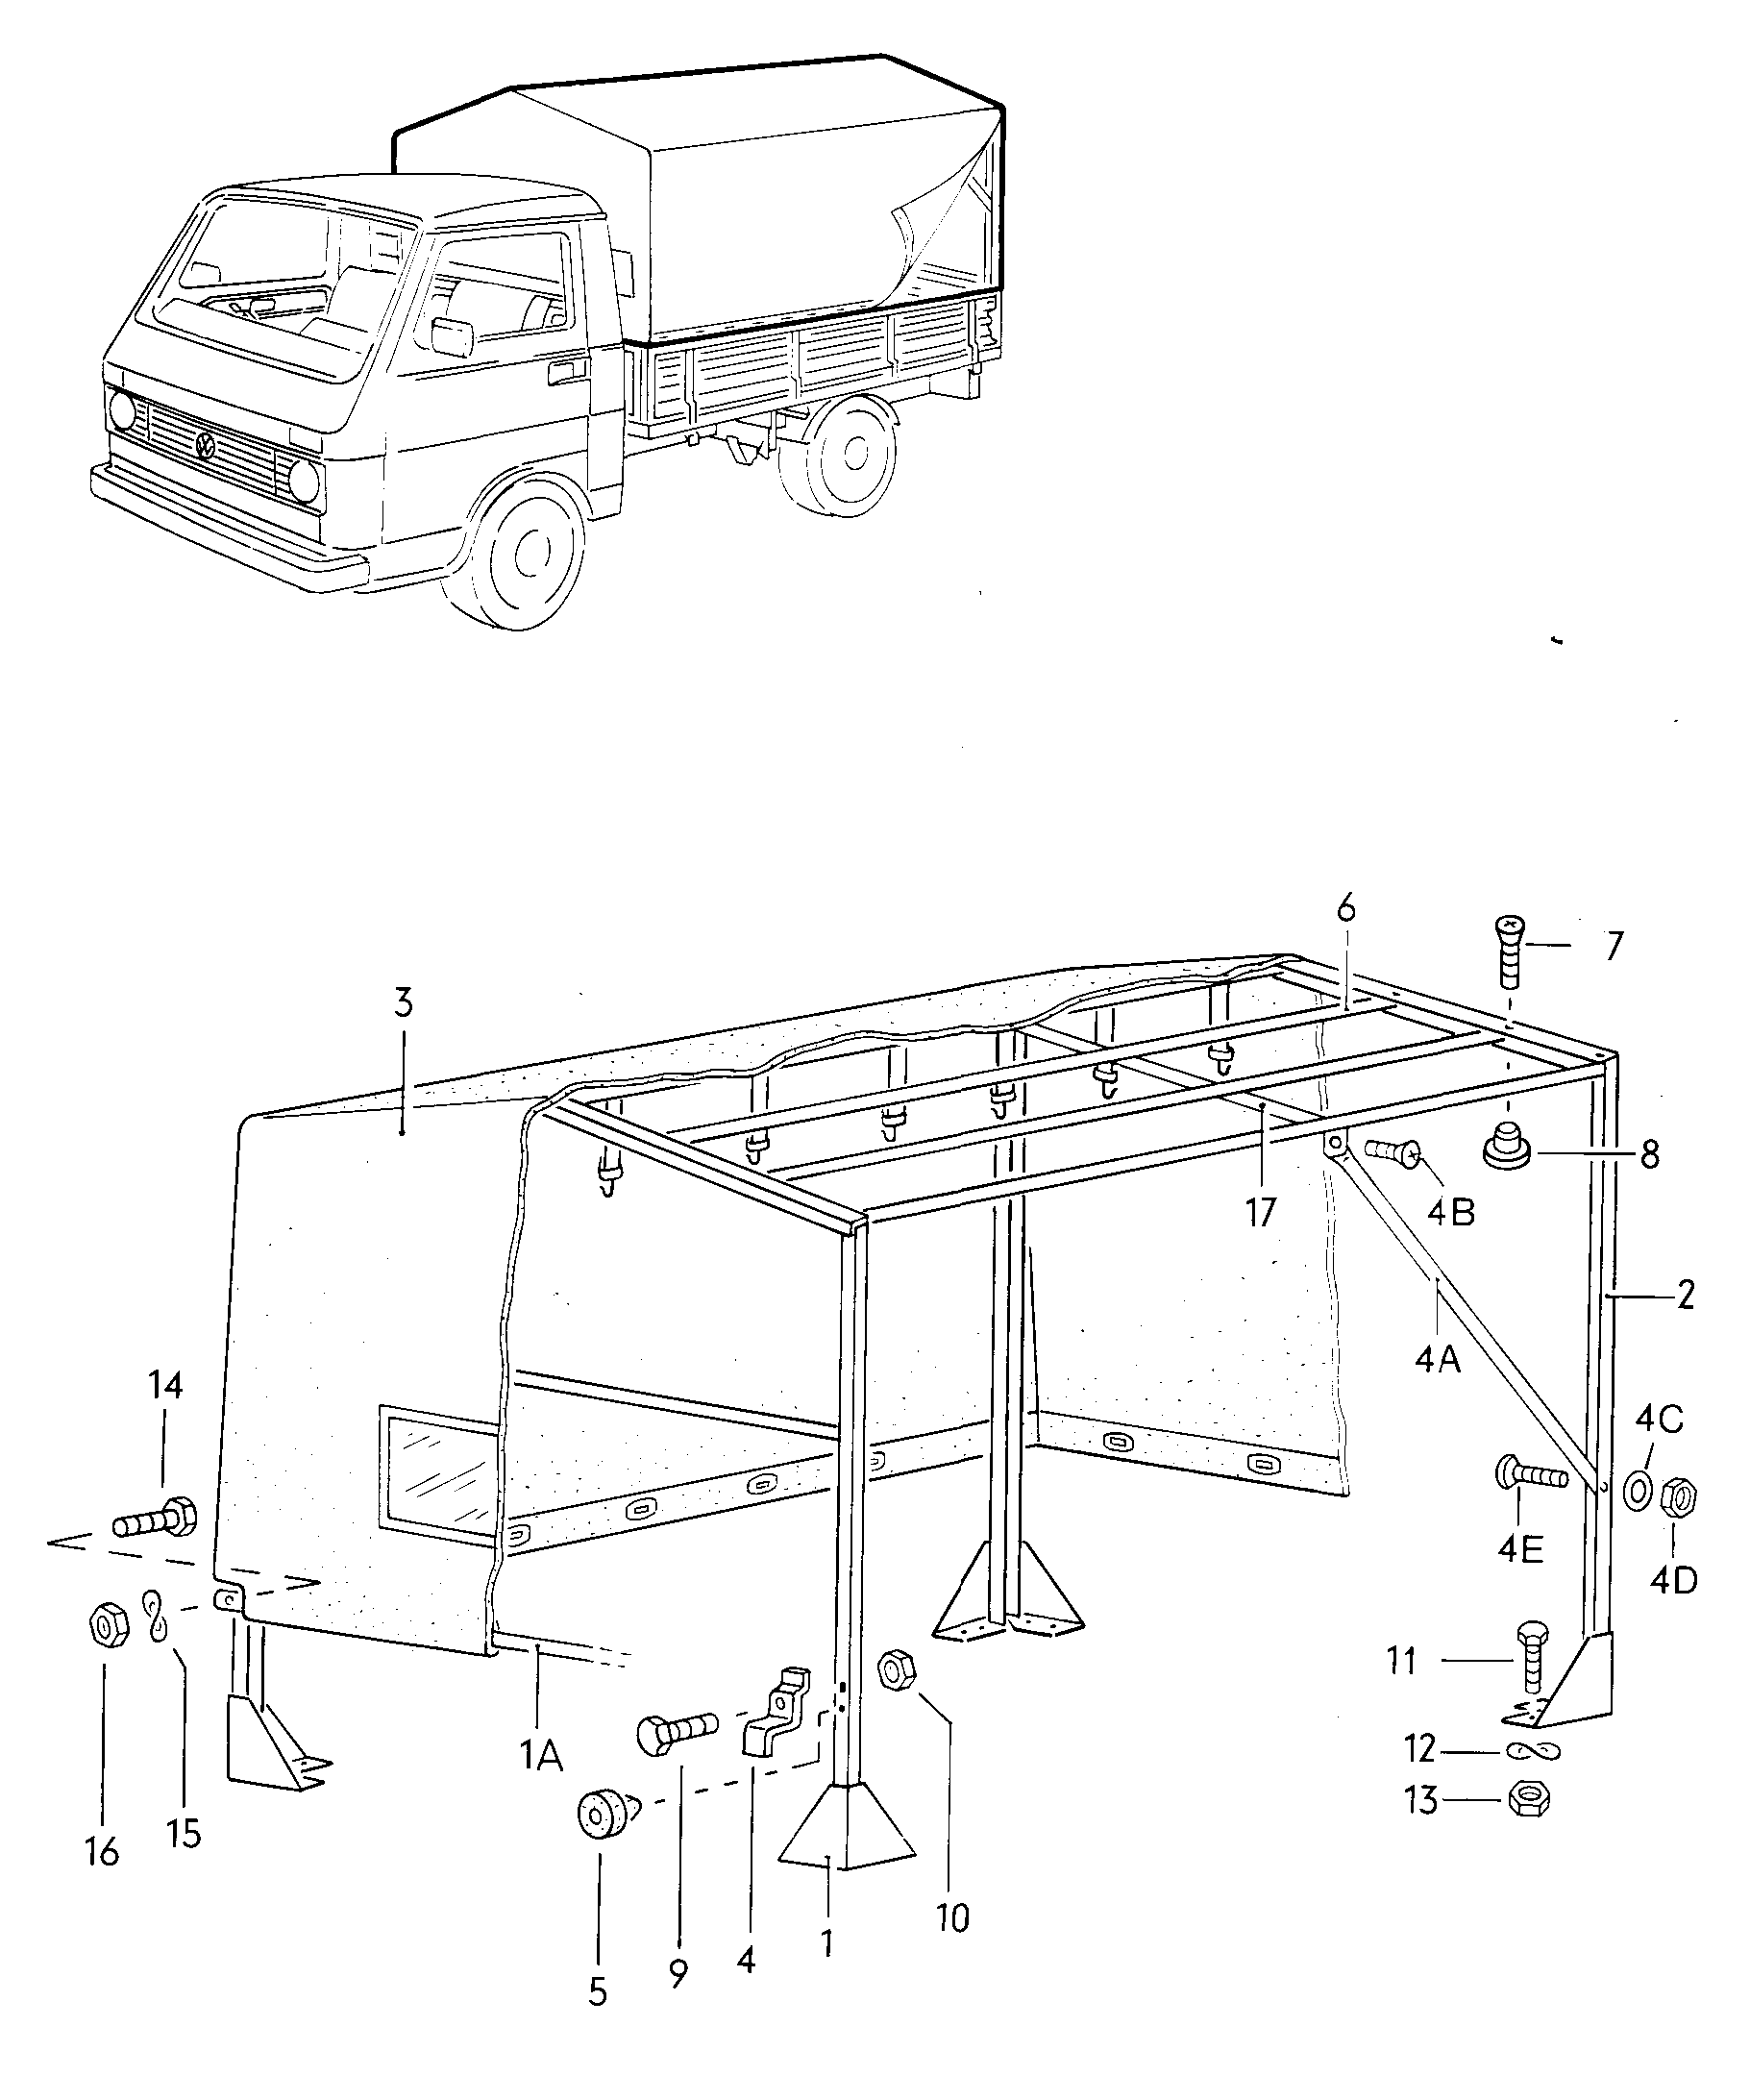 frame with canopy and<br>attachment parts  - LT, LT 4x4 - lt